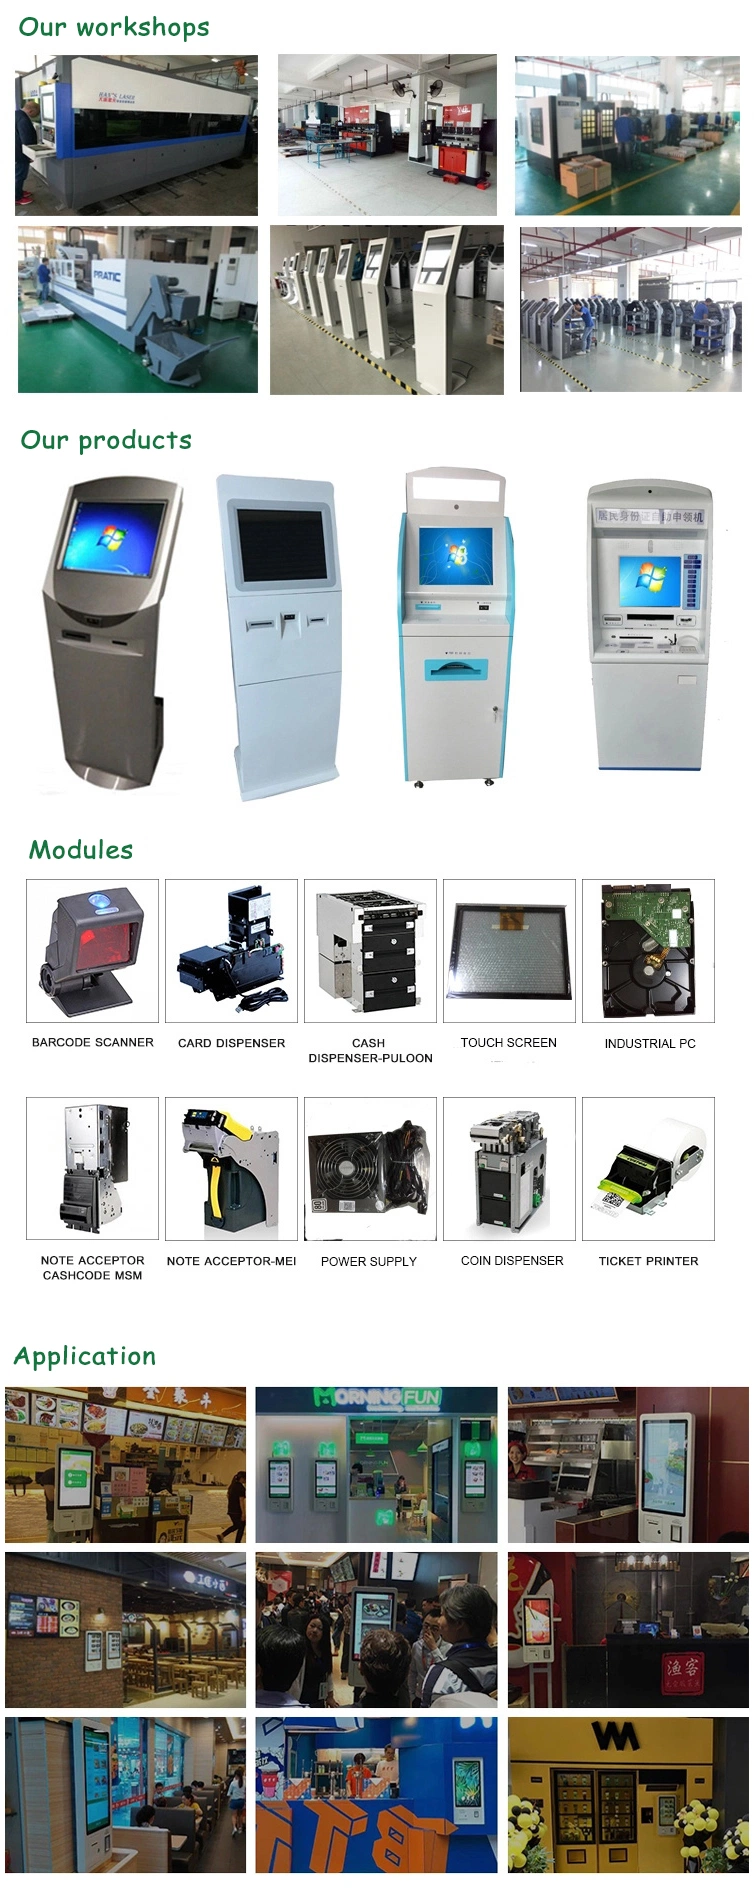 Self-Service Kiosk with Facial Recognition in Different Working Areas Based on Custom Design with Certifications/Bank Ticketing/Hospital/Reataurant